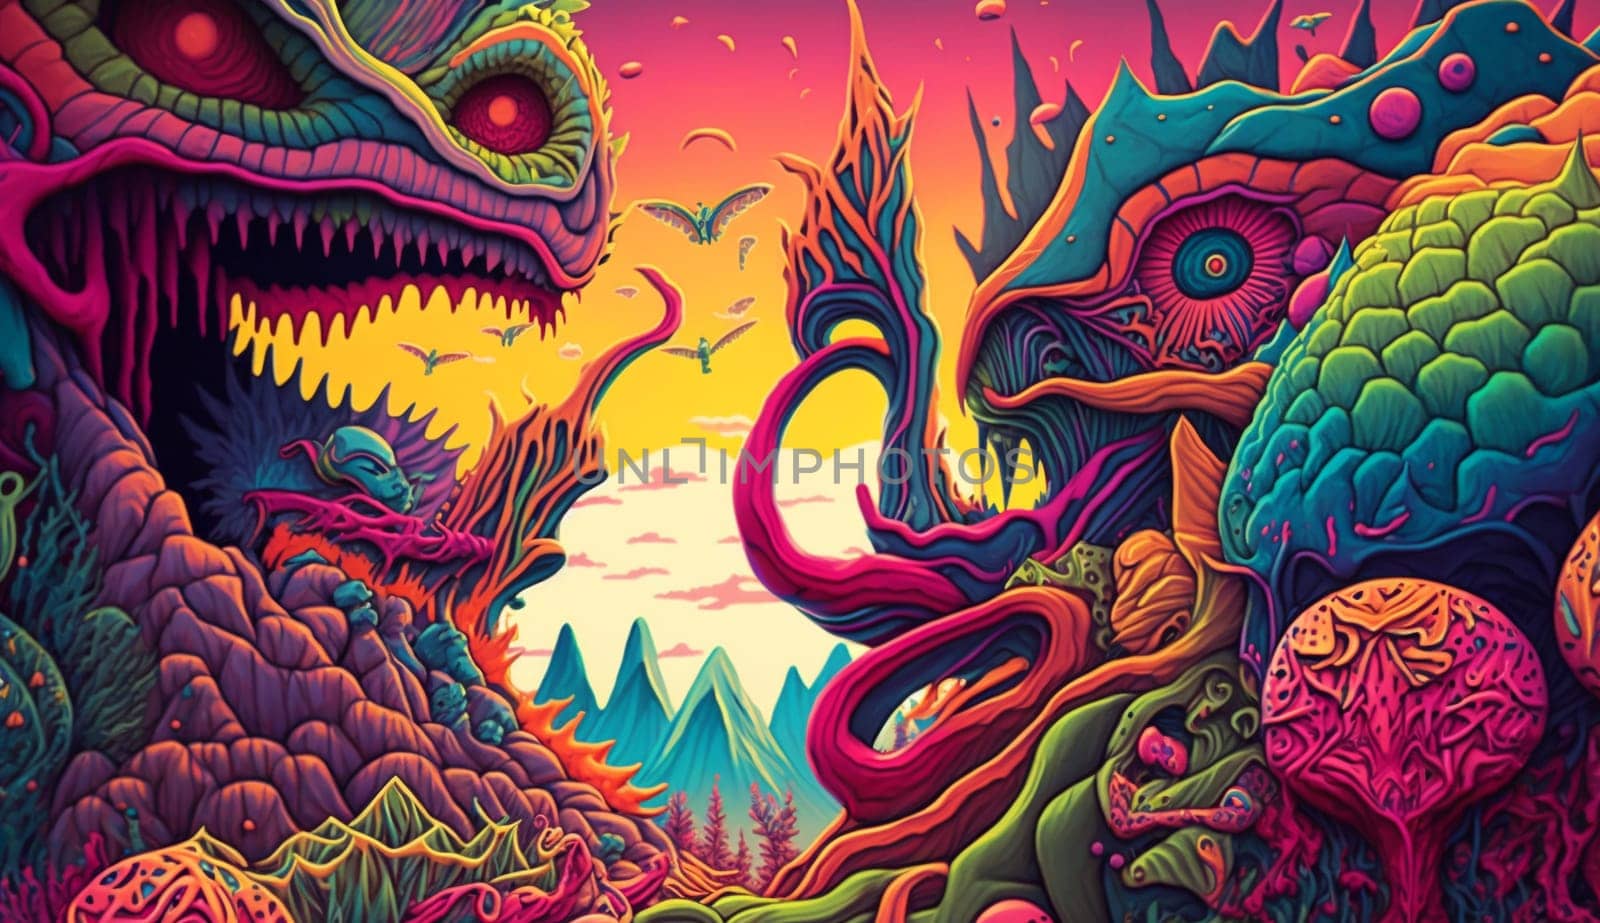 Psychedelic hallucinations. Vibrant illustration. Surreal images. Template for cards, stickers, baners, posters, web social media print